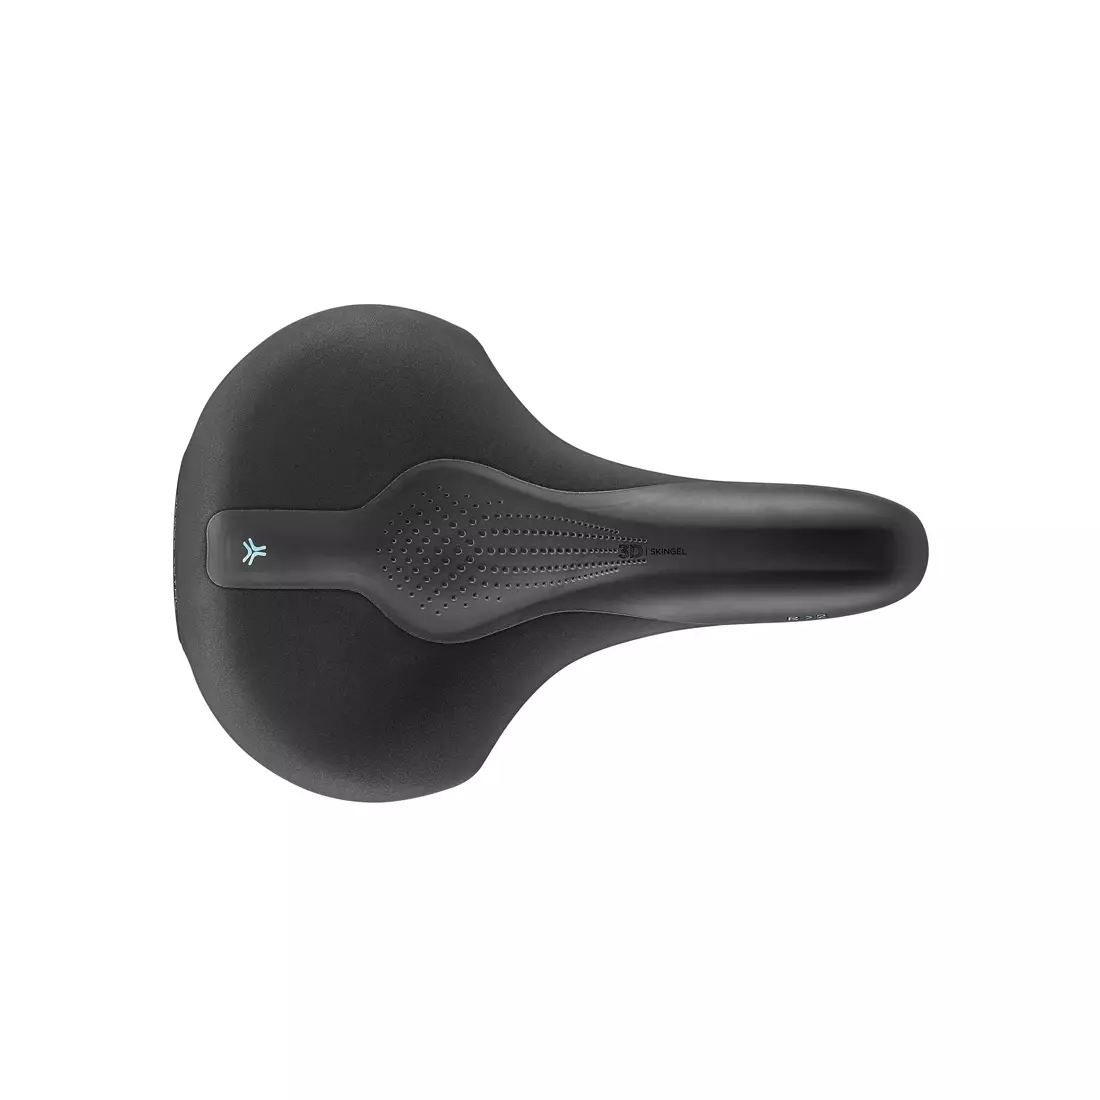 SELLEROYAL SCIENTIA RELAXED R2 MEDIUM bicycle saddle 90st. gel + elastomers unisex SR-54R0MB0A09210